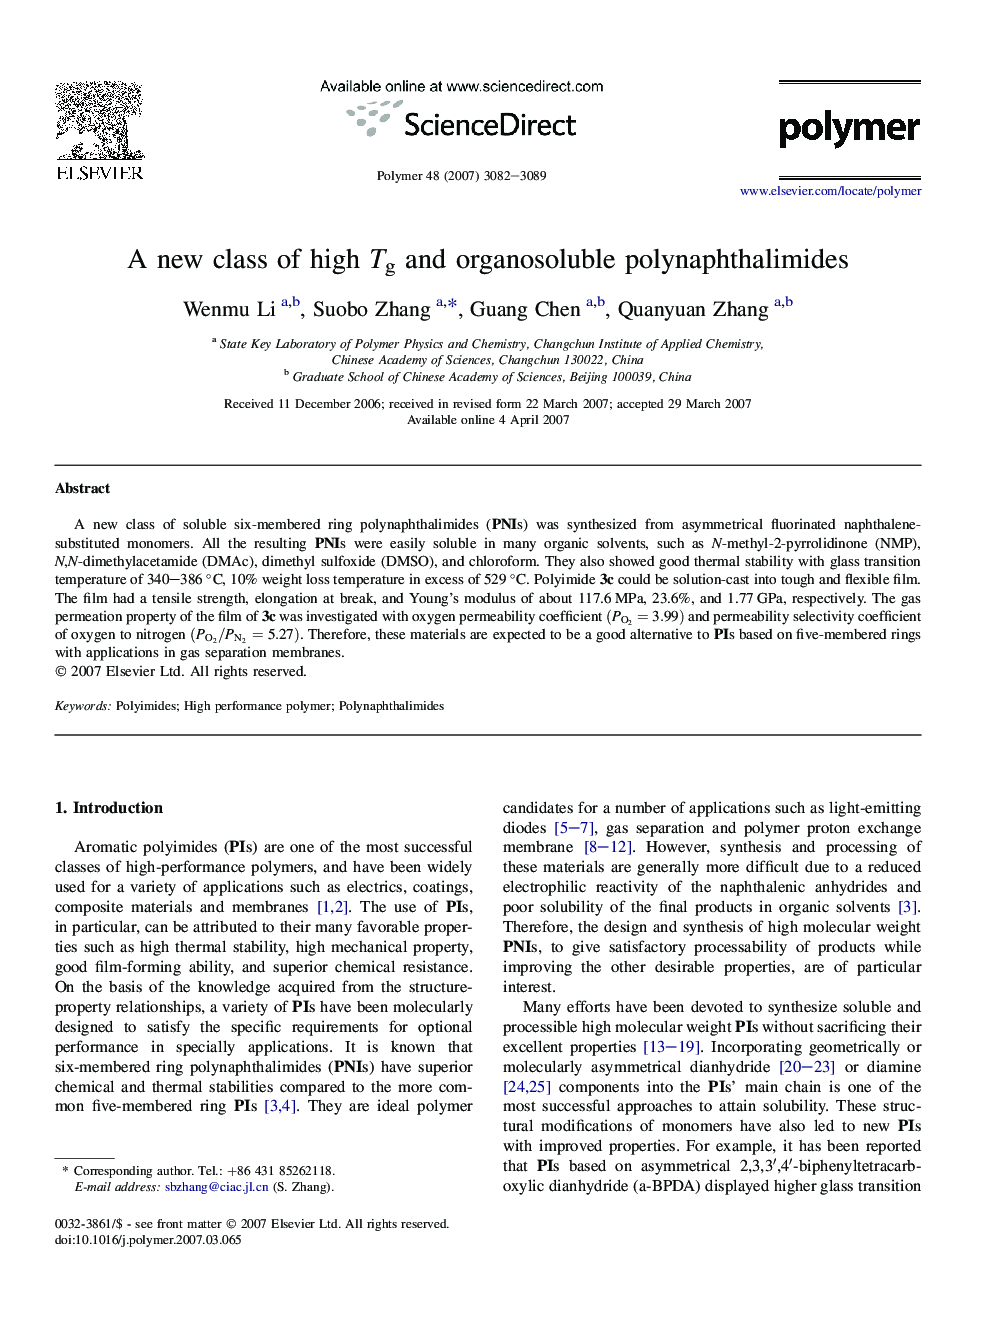 A new class of high Tg and organosoluble polynaphthalimides